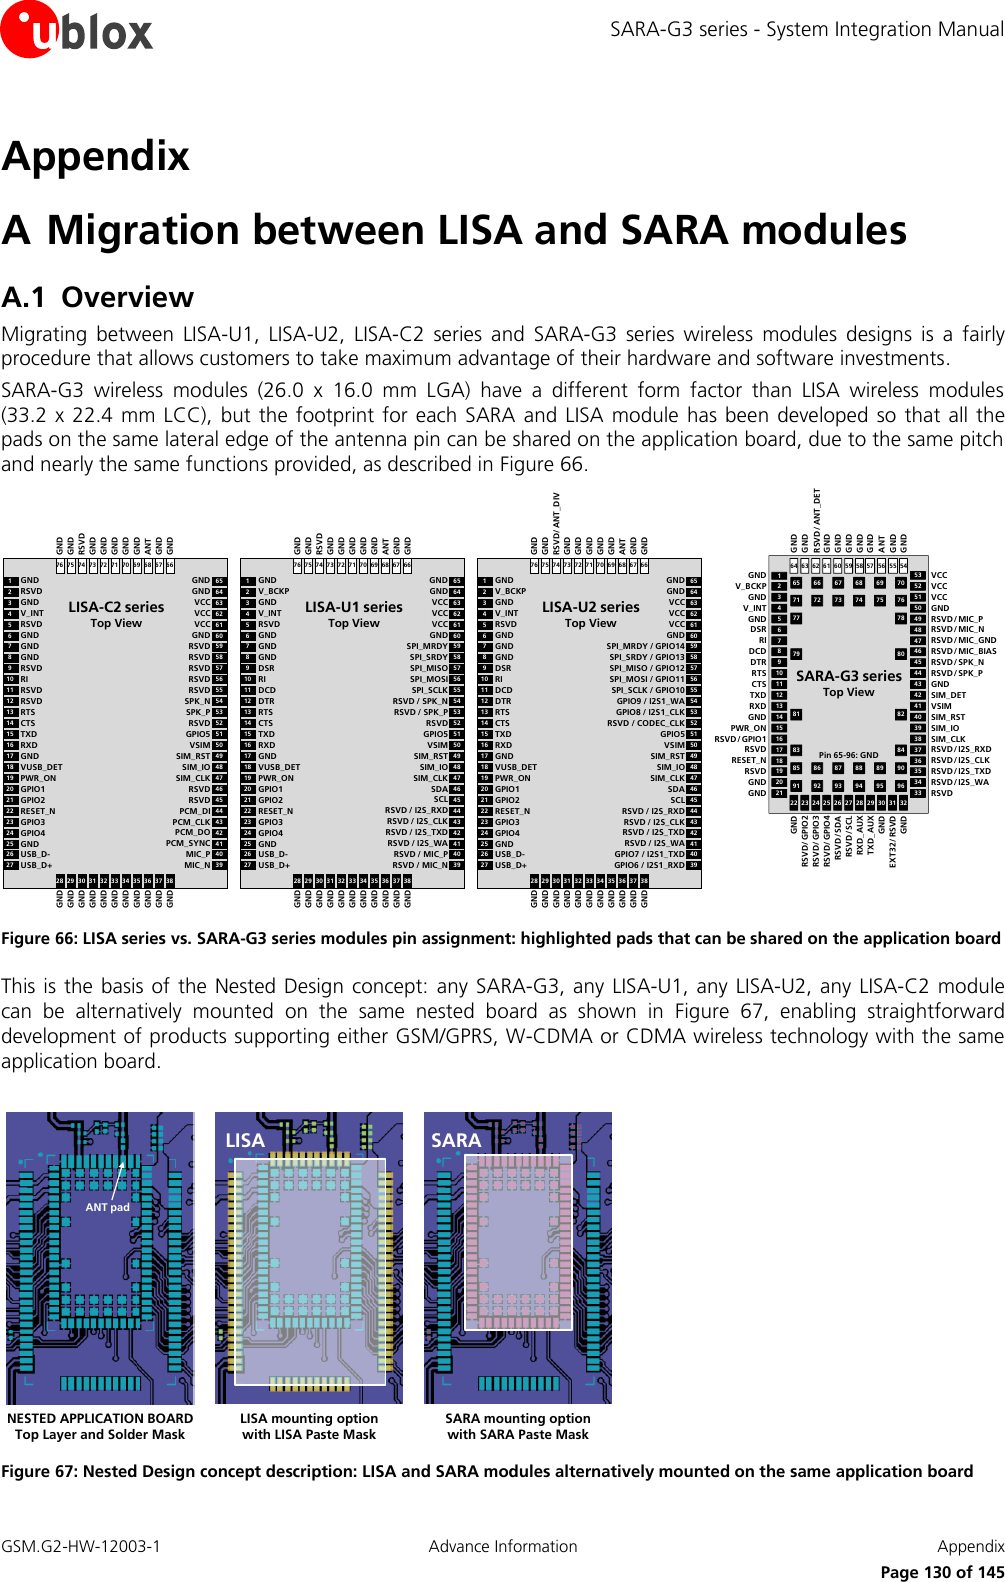 SARA-G3 series - System Integration Manual GSM.G2-HW-12003-1  Advance Information  Appendix      Page 130 of 145 Appendix A Migration between LISA and SARA modules A.1 Overview Migrating  between  LISA-U1,  LISA-U2,  LISA-C2  series  and  SARA-G3  series  wireless  modules  designs  is  a  fairly procedure that allows customers to take maximum advantage of their hardware and software investments. SARA-G3  wireless  modules  (26.0  x  16.0  mm  LGA)  have  a  different  form  factor  than  LISA  wireless  modules  (33.2 x 22.4  mm LCC),  but  the footprint for each  SARA and LISA  module  has been developed so that  all the pads on the same lateral edge of the antenna pin can be shared on the application board, due to the same pitch and nearly the same functions provided, as described in Figure 66. 64 63 61 60 58 57 55 5422 23 25 26 28 29 31 3211108754212119181615131243444647495052533335363839414265 66 67 68 69 7071 72 73 74 75 7677 7879 8081 8283 8485 86 87 88 89 9091 92 93 94 95 96CTSRTSDCDRIV_INTV_BCKPGNDRSVDRESET_NRSVD/ GPIO1PWR_ONRXDTXD32017149624 27 305148454037345962 56GNDGNDDSRDTRGNDRSVDGNDGNDRXD_AUXTXD_AUXEXT32 / RSVDGNDRSVD/ GPIO2RSVD/ GPIO3RSVD/ SDARSVD/SCLRSVD/ GPIO4GNDGNDGNDRSVD/ SPK_PRSVD/ MIC_BIASRSVD/ MIC_GNDRSVD/ MIC_PGNDVCCVCCRSVDRSVD/ I2S_TXDRSVD/ I2S_CLKSIM_CLKSIM_IOVSIMSIM_DETVCCRSVD/ MIC_NRSVD/ SPK_NSIM_RSTRSVD/ I2S_RXDRSVD/ I2S_WAGNDGNDGNDGNDGNDGNDGNDGNDGNDRSVD/ ANT_DETANTSARA-G3 seriesTop ViewPin 65-96: GND65646362616059585756555453525150494847464544434241GNDVCCVCCVCCGNDSPI_MRDYSPI_SRDYSPI_MISOSPI_MOSISPI_SCLKRSVD / SPK_NGNDRSVD / SPK_PRSVDGPIO5VSIMSIM_RSTSIM_IOSIM_CLKSDASCLRSVD / I2S_RXDRSVD / I2S_CLKRSVD / I2S_TXDRSVD / I2S_WA12345678910111213141516171819202122232425V_BCKPGNDV_INTRSVDGNDGNDGNDDSRRIDCDDTRGNDRTSCTSTXDRXDGNDVUSB_DETPWR_ONGPIO1GPIO2RESET_NGPIO3GPIO4GND2627USB_D-USB_D+4039RSVD / MIC_PRSVD / MIC_N28 29 30 31 32 33 34 35 36 37 3876 75 74 73 72 71 70 69 68 67 66LISA-U1 seriesTop ViewGNDRSVDGNDGNDGNDGNDGNDANTGNDGNDGNDGNDGNDGNDGNDGNDGNDGNDGNDGNDGNDGND65646362616059585756555453525150494847464544434241GNDVCCVCCVCCGNDSPI_MRDY / GPIO14SPI_SRDY / GPIO13SPI_MISO / GPIO12SPI_MOSI / GPIO11SPI_SCLK / GPIO10GPIO9 / I2S1_WAGNDGPIO8 / I2S1_CLKRSVD / CODEC_CLKGPIO5VSIMSIM_RSTSIM_IOSIM_CLKSDASCLRSVD / I2S_RXDRSVD / I2S_CLKRSVD / I2S_TXDRSVD / I2S_WA12345678910111213141516171819202122232425V_BCKPGNDV_INTRSVDGNDGNDGNDDSRRIDCDDTRGNDRTSCTSTXDRXDGNDVUSB_DETPWR_ONGPIO1GPIO2RESET_NGPIO3GPIO4GND2627USB_D-USB_D+4039GPIO7 / I2S1_TXDGPIO6 / I2S1_RXD28 29 30 31 32 33 34 35 36 37 3876 75 74 73 72 71 70 69 68 67 66LISA-U2 seriesTop ViewGNDRSVD/ ANT_DIVGNDGNDGNDGNDGNDANTGNDGNDGNDGNDGNDGNDGNDGNDGNDGNDGNDGNDGNDGND65646362616059585756555453525150494847464544434241GNDVCCVCCVCCGNDRSVDRSVDRSVDRSVDRSVDSPK_NGNDSPK_PRSVDGPIO5VSIMSIM_RSTSIM_IOSIM_CLKRSVDRSVDPCM_DIPCM_CLKPCM_DOPCM_SYNC12345678910111213141516171819202122232425RSVDGNDV_INTRSVDGNDGNDGNDRSVDRIRSVDRSVDGNDRTSCTSTXDRXDGNDVUSB_DETPWR_ONGPIO1GPIO2RESET_NGPIO3GPIO4GND2627USB_D-USB_D+4039MIC_PMIC_N28 29 30 31 32 33 34 35 36 37 3876 75 74 73 72 71 70 69 68 67 66LISA-C2 seriesTop ViewGNDRSVDGNDGNDGNDGNDGNDANTGNDGNDGNDGNDGNDGNDGNDGNDGNDGNDGNDGNDGNDGND Figure 66: LISA series vs. SARA-G3 series modules pin assignment: highlighted pads that can be shared on the application board This is the basis of the Nested  Design  concept:  any SARA-G3, any  LISA-U1, any LISA-U2, any  LISA-C2 module can  be  alternatively  mounted  on  the  same  nested  board  as  shown  in  Figure  67,  enabling  straightforward development of products supporting either GSM/GPRS, W-CDMA or CDMA wireless technology with the same application board.  LISANESTED APPLICATION BOARDTop Layer and Solder MaskLISA mounting optionwith LISA Paste MaskSARASARA mounting optionwith SARA Paste MaskANT pad Figure 67: Nested Design concept description: LISA and SARA modules alternatively mounted on the same application board 